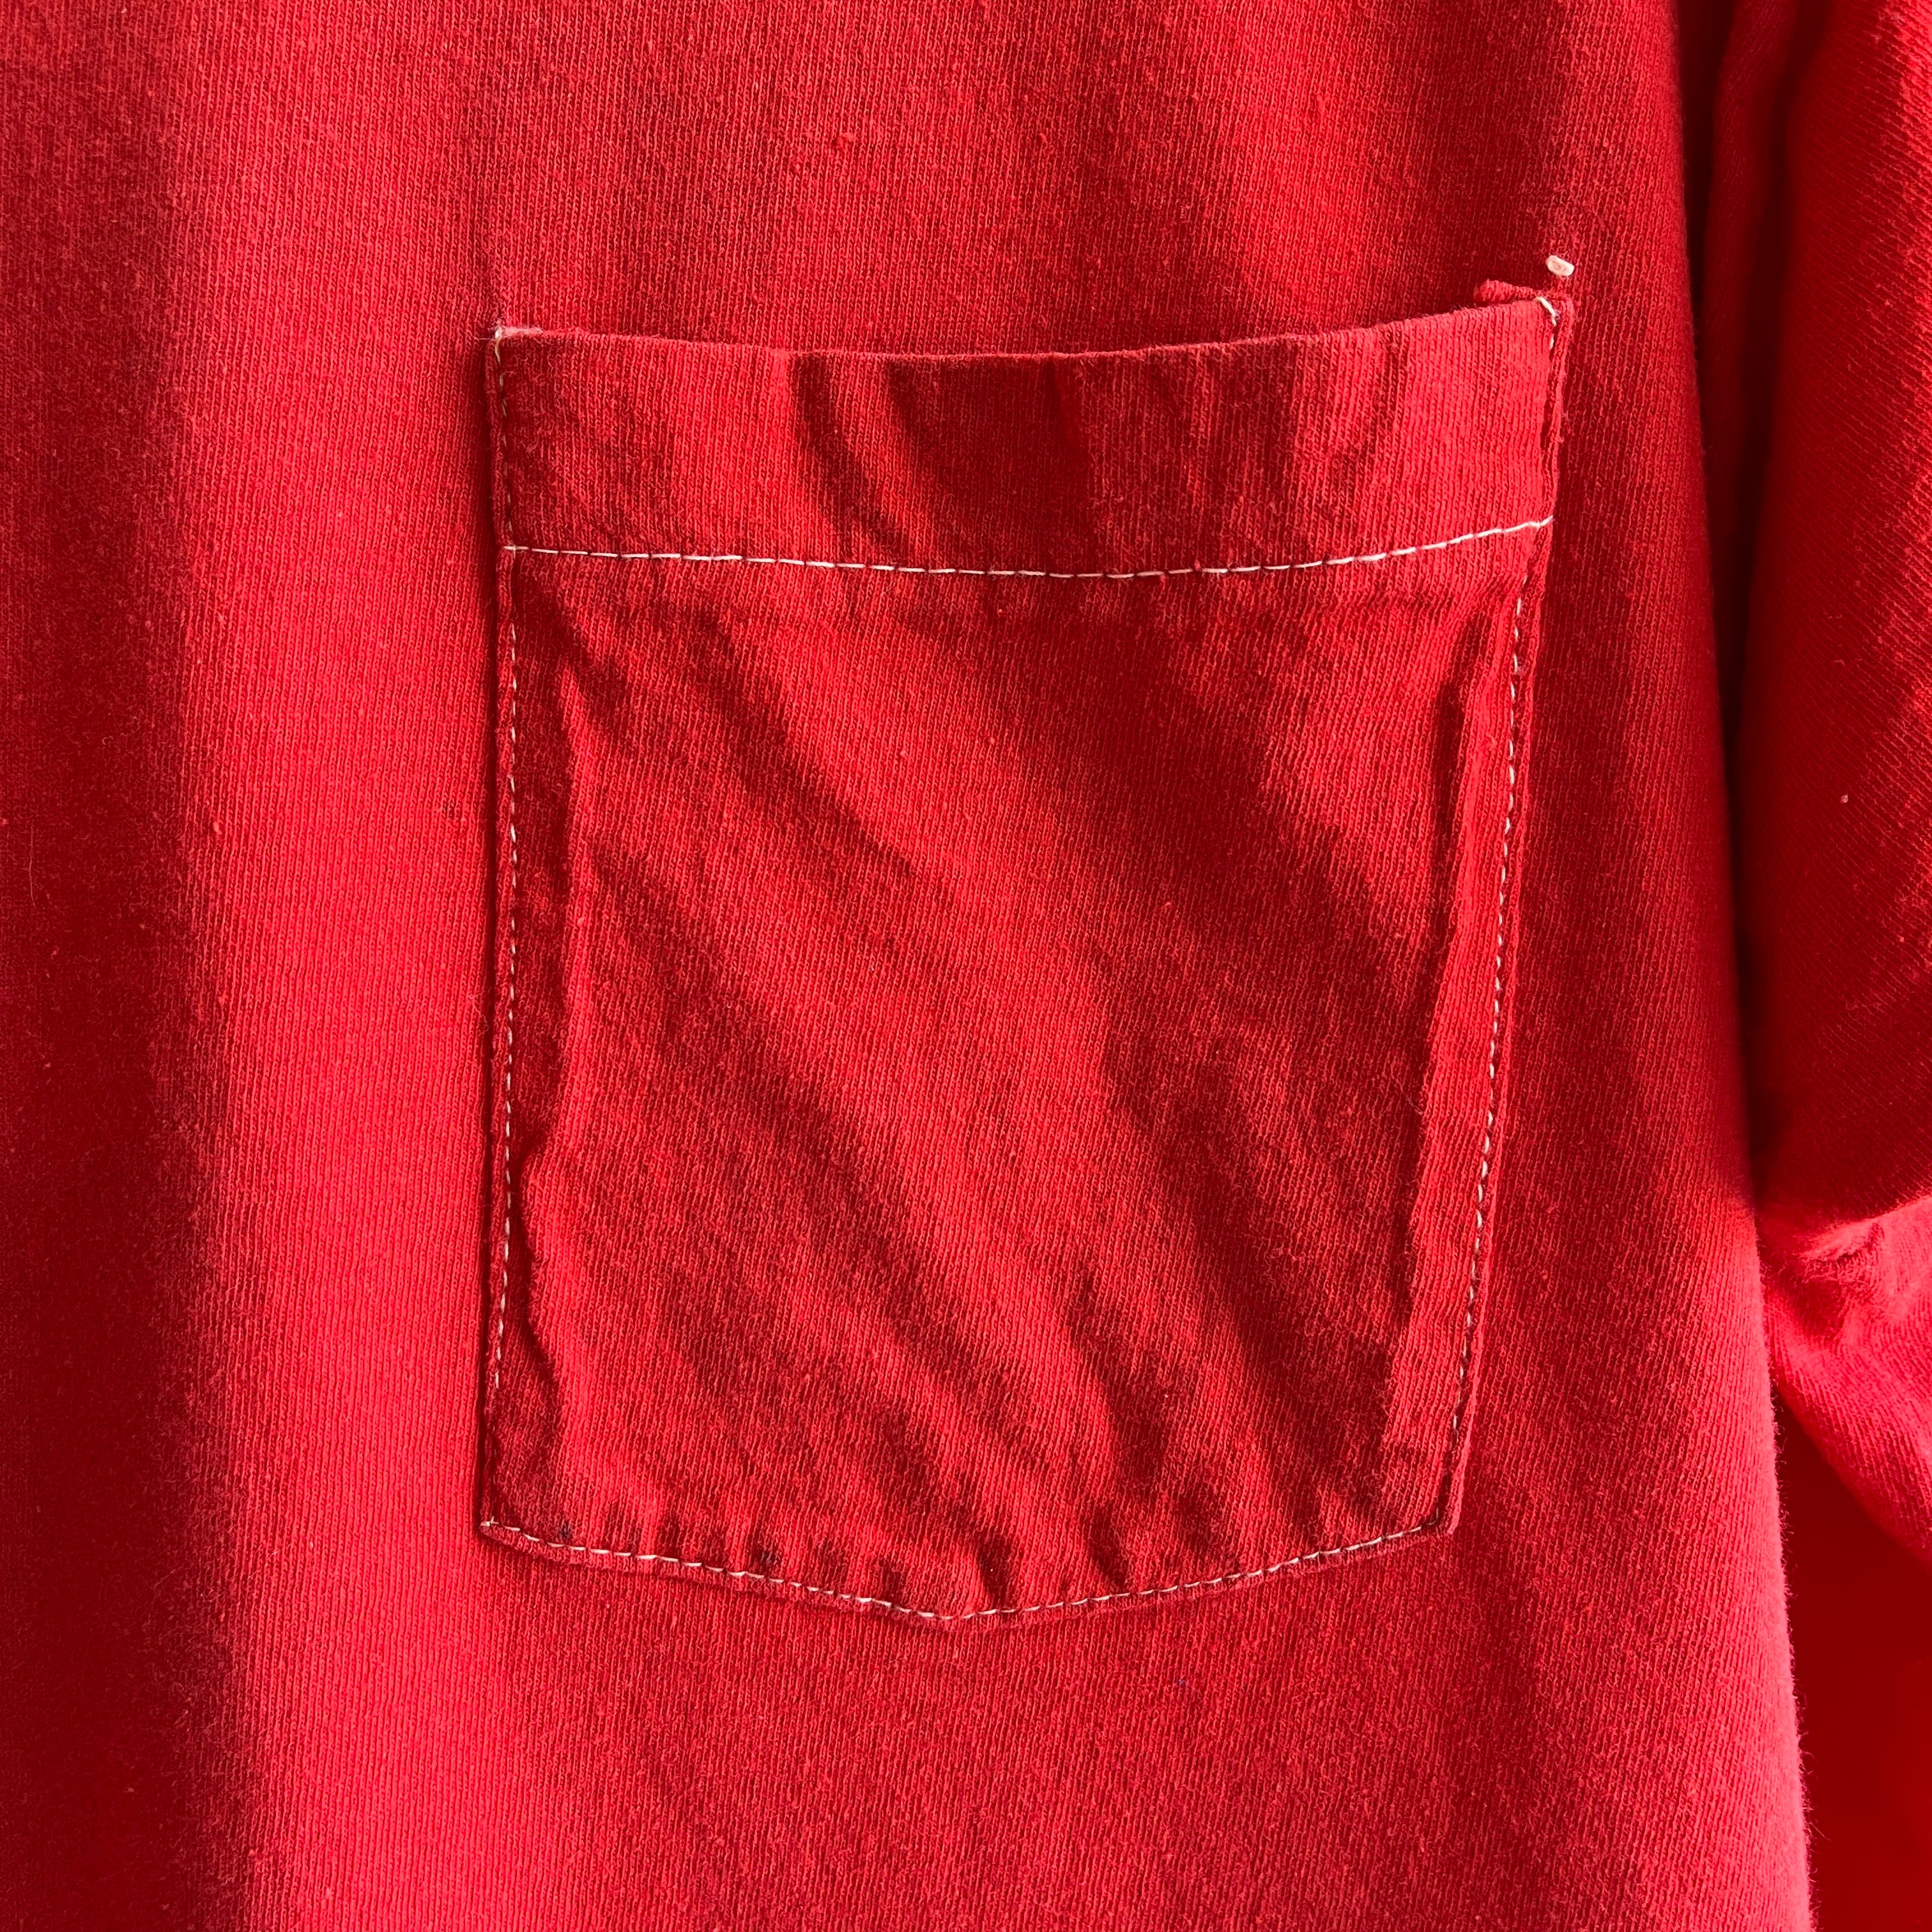 1980s FOTL Blank Red Pocket T-Shirt with Contrast White Pocket Stitching - It's the Little Things!